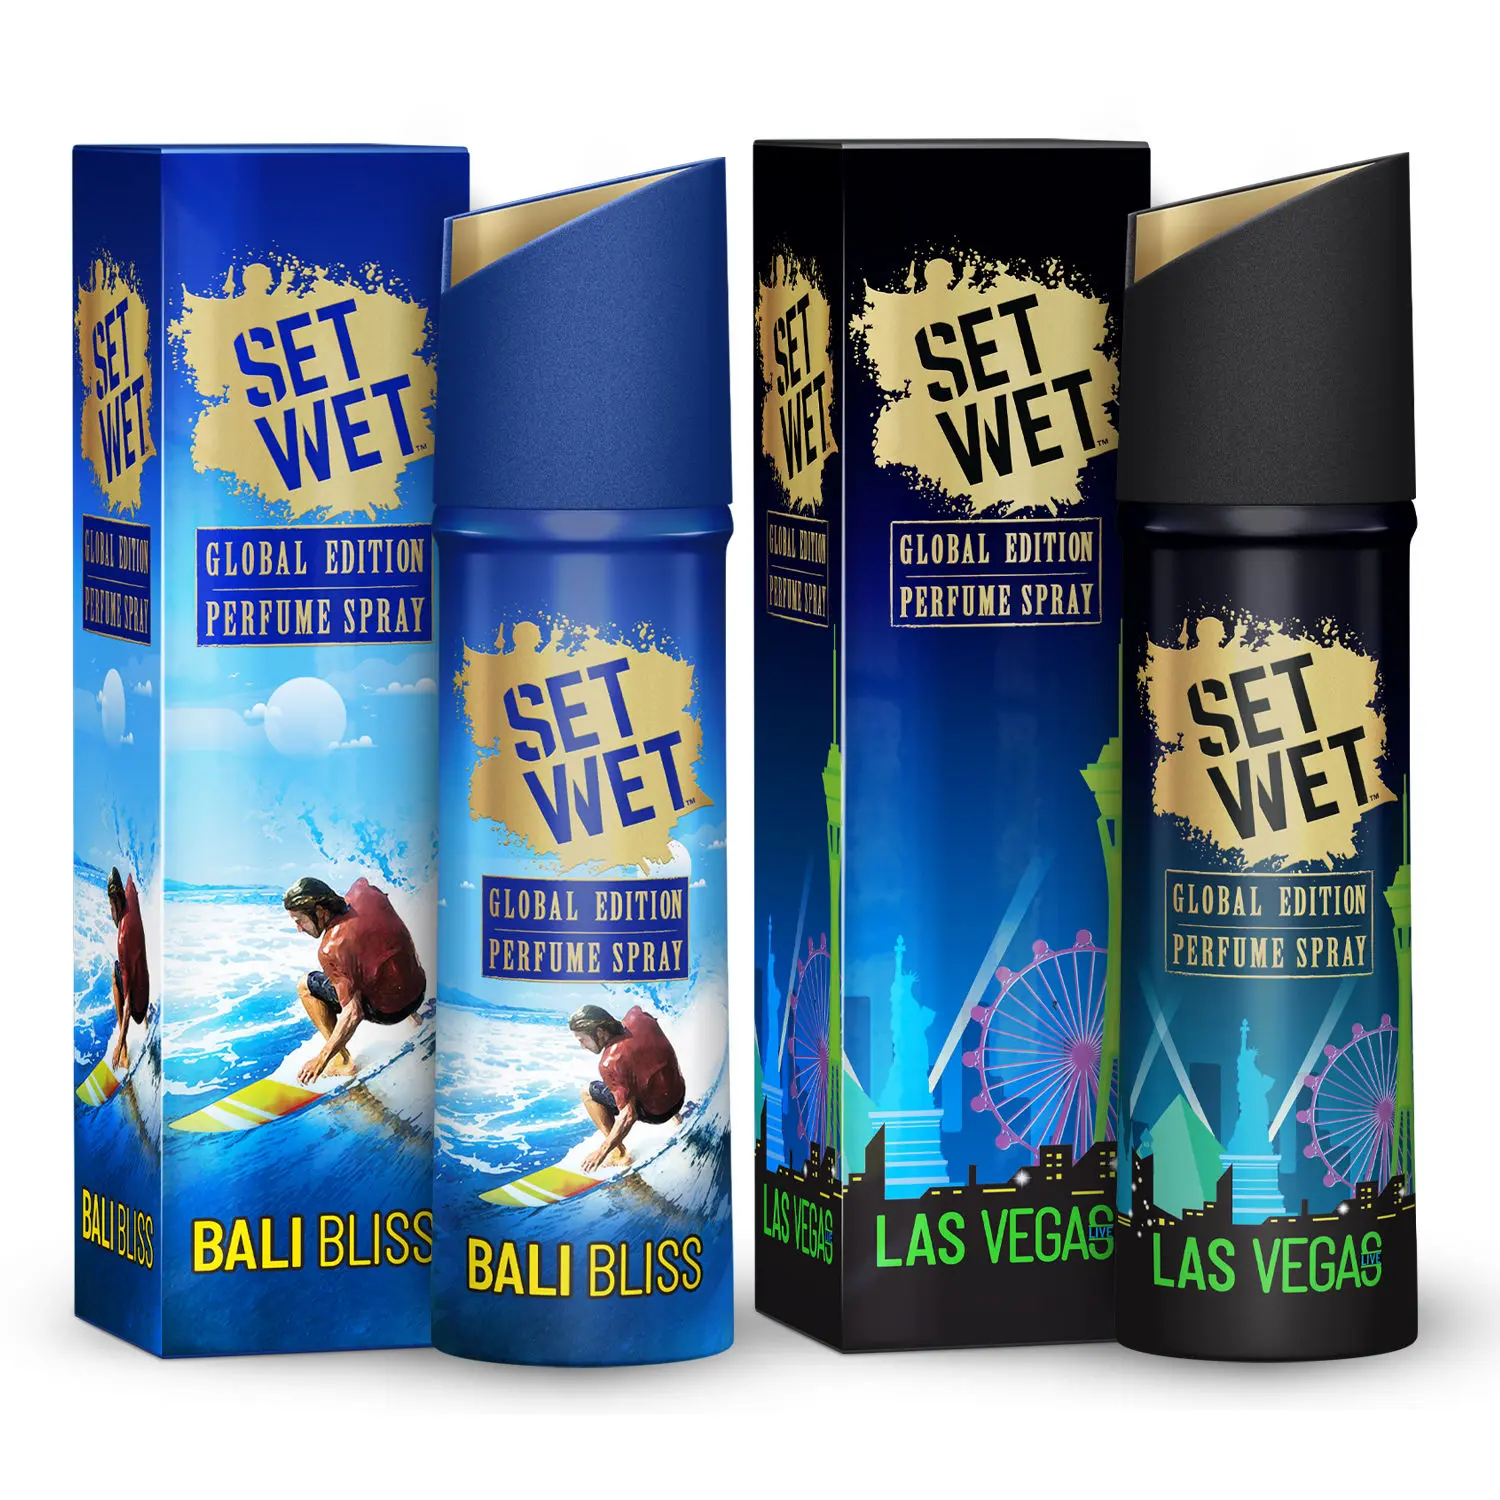 Set Wet Global Edition Bali Bliss With Las Vegas Live, No Gas Perfume Body Spray & Deodorant For Men, Each 120 ml, (Pack of 2)